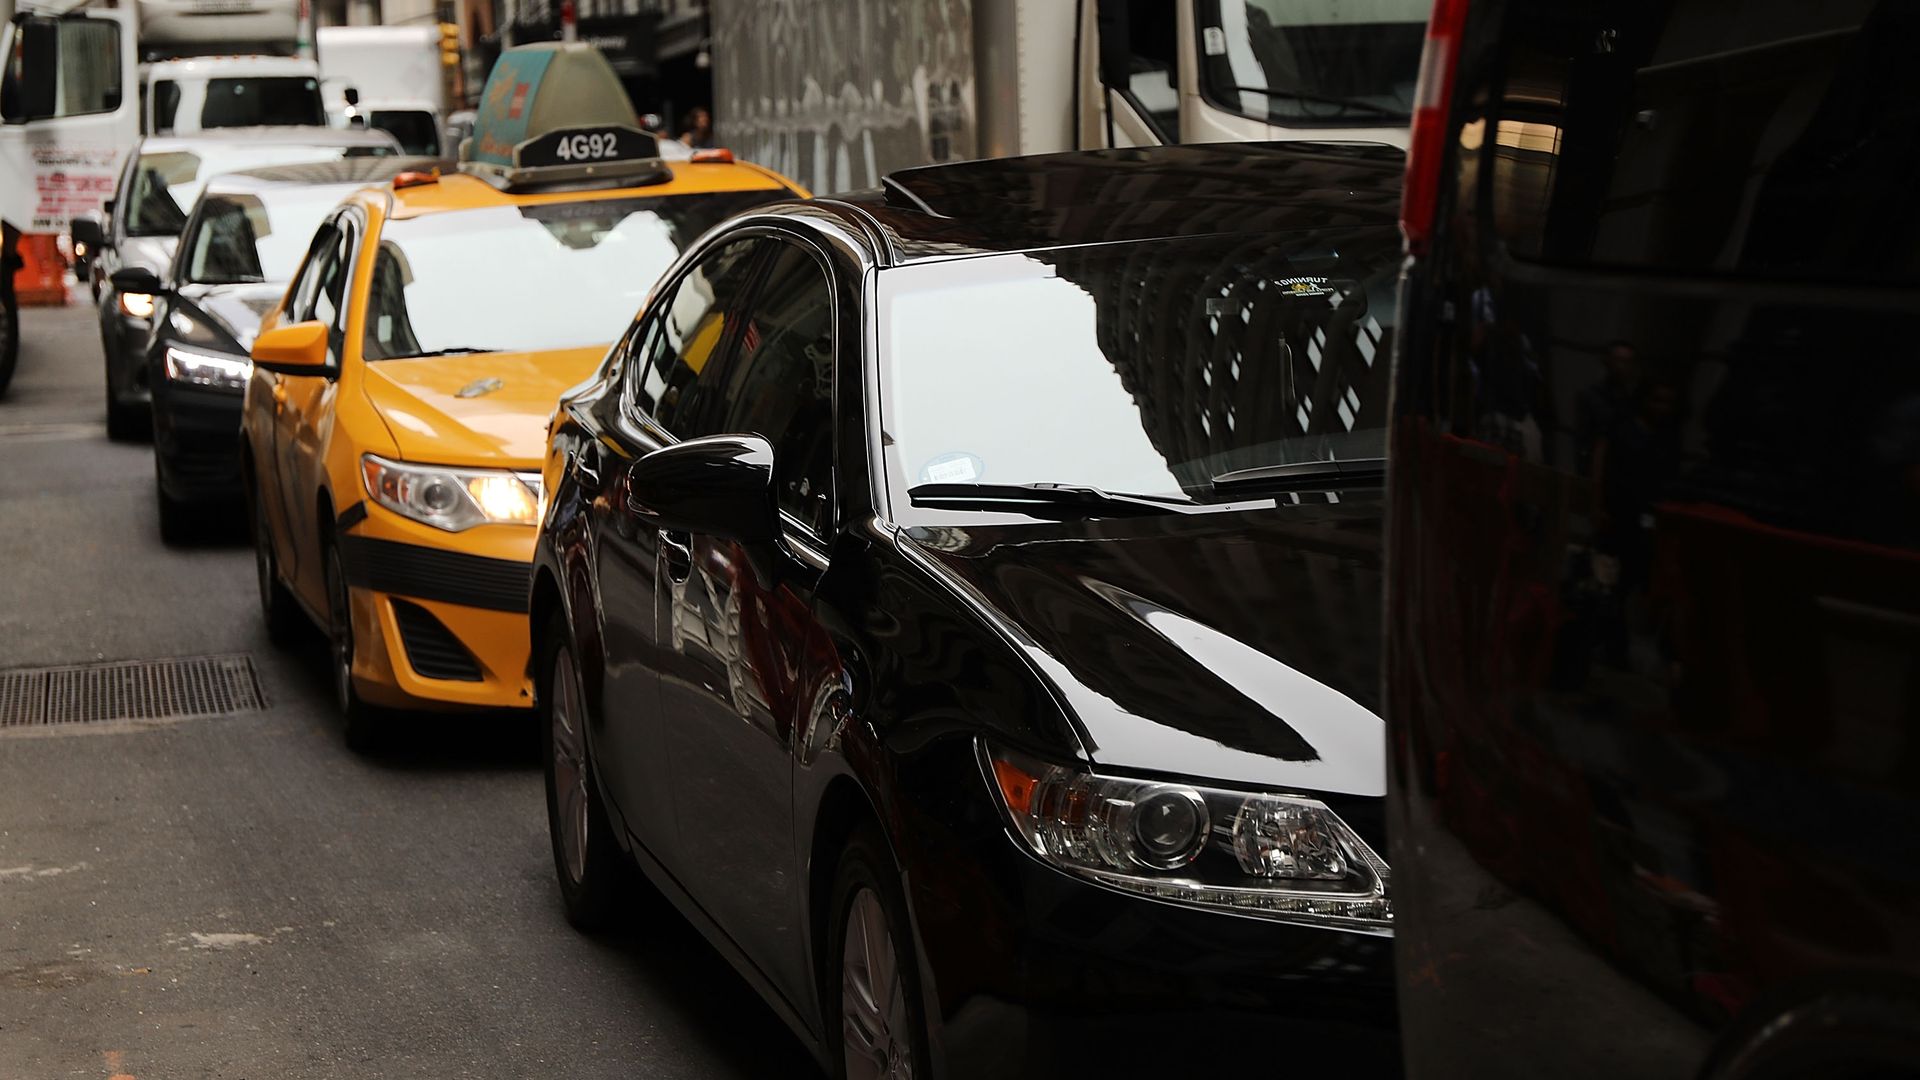 A line of cars and taxis in New York